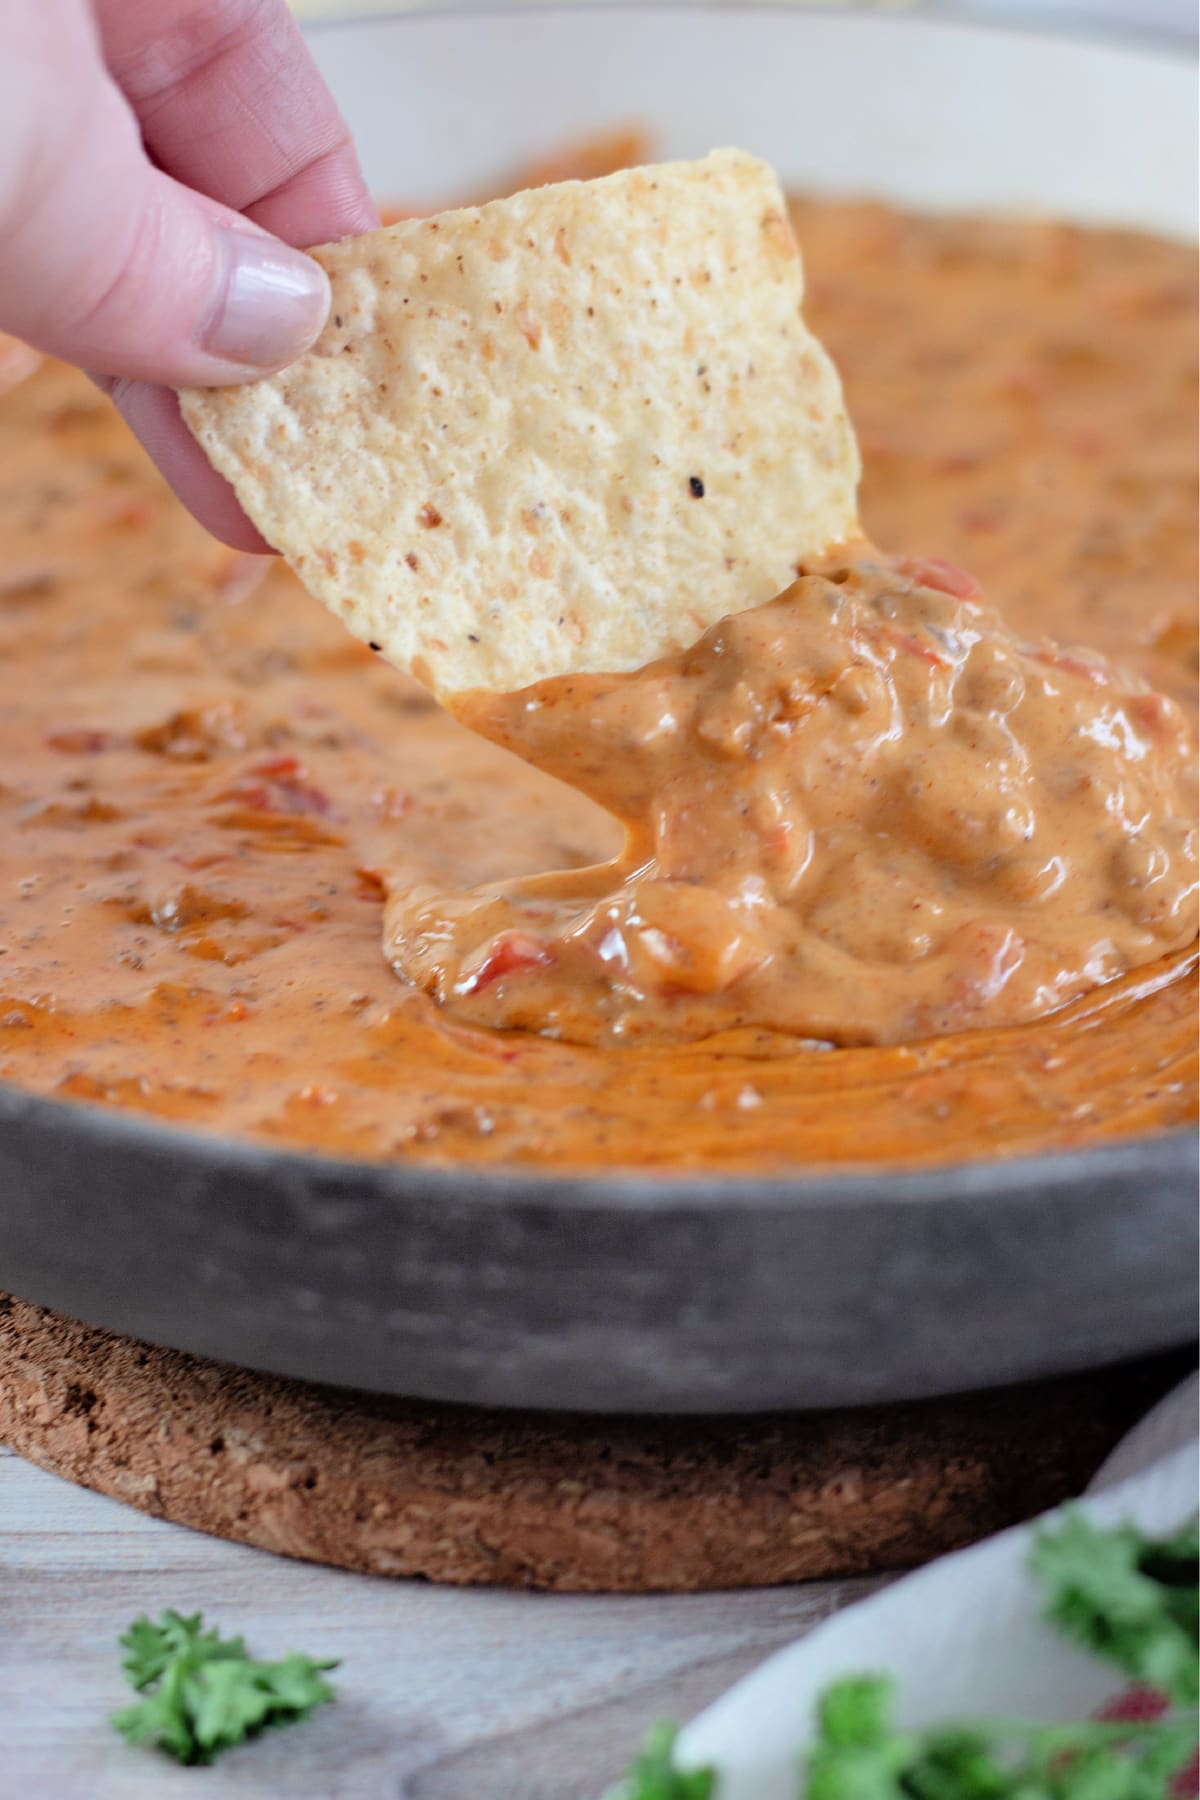 Hand dipping a tortilla chip into rotel dip.